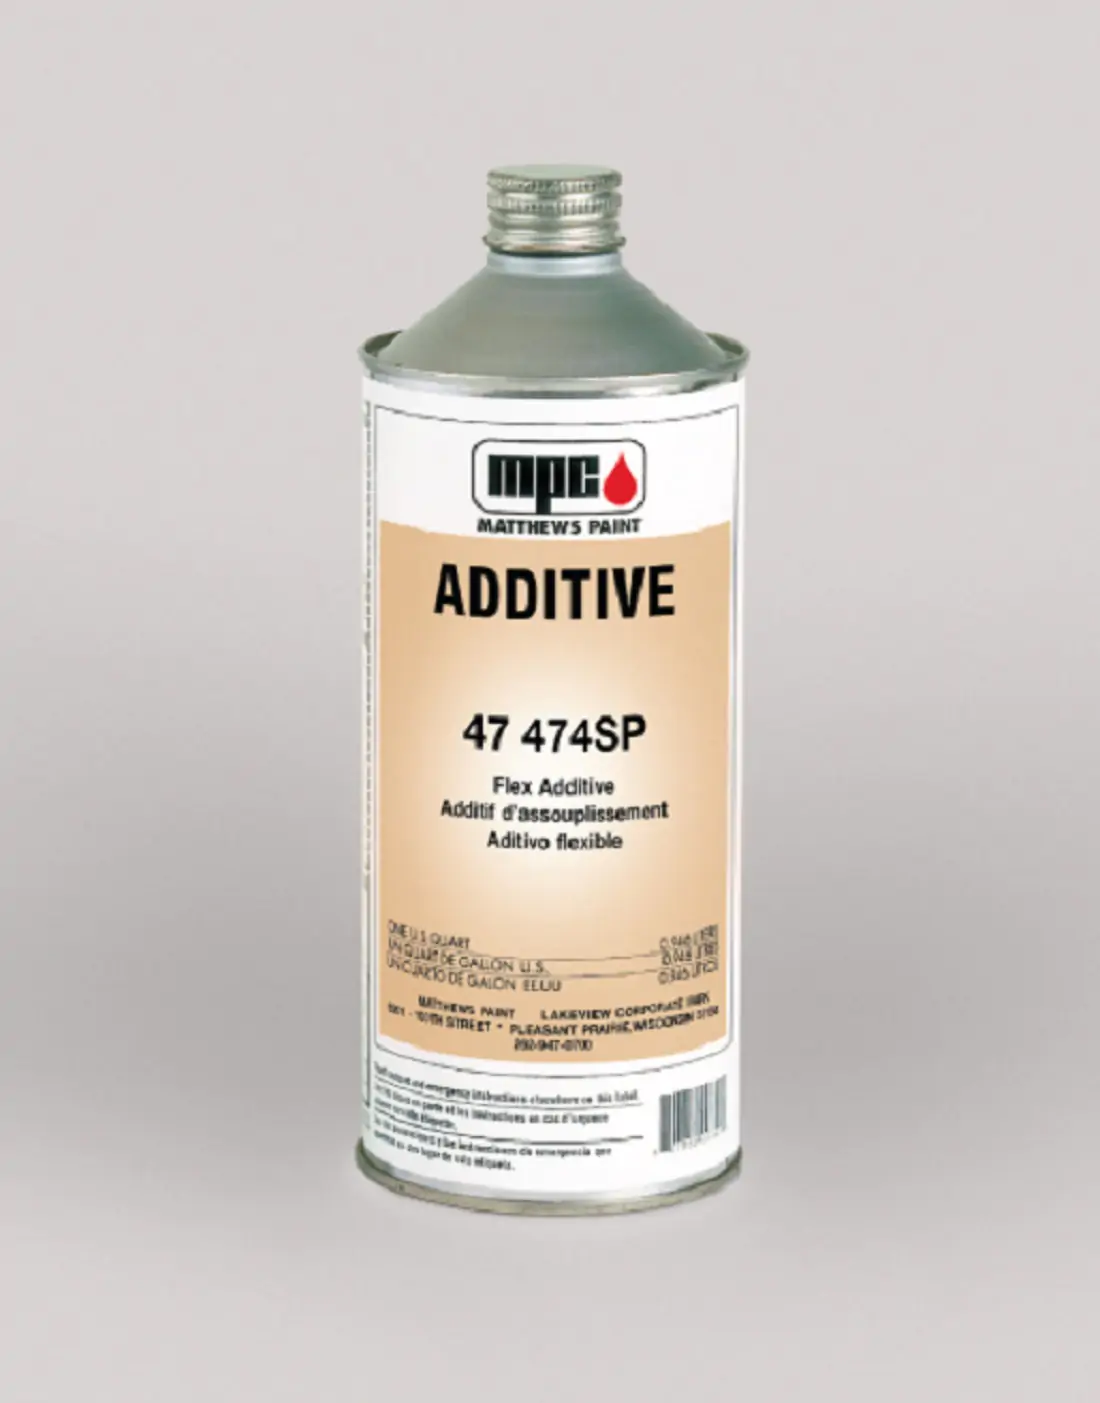 MPC additive can